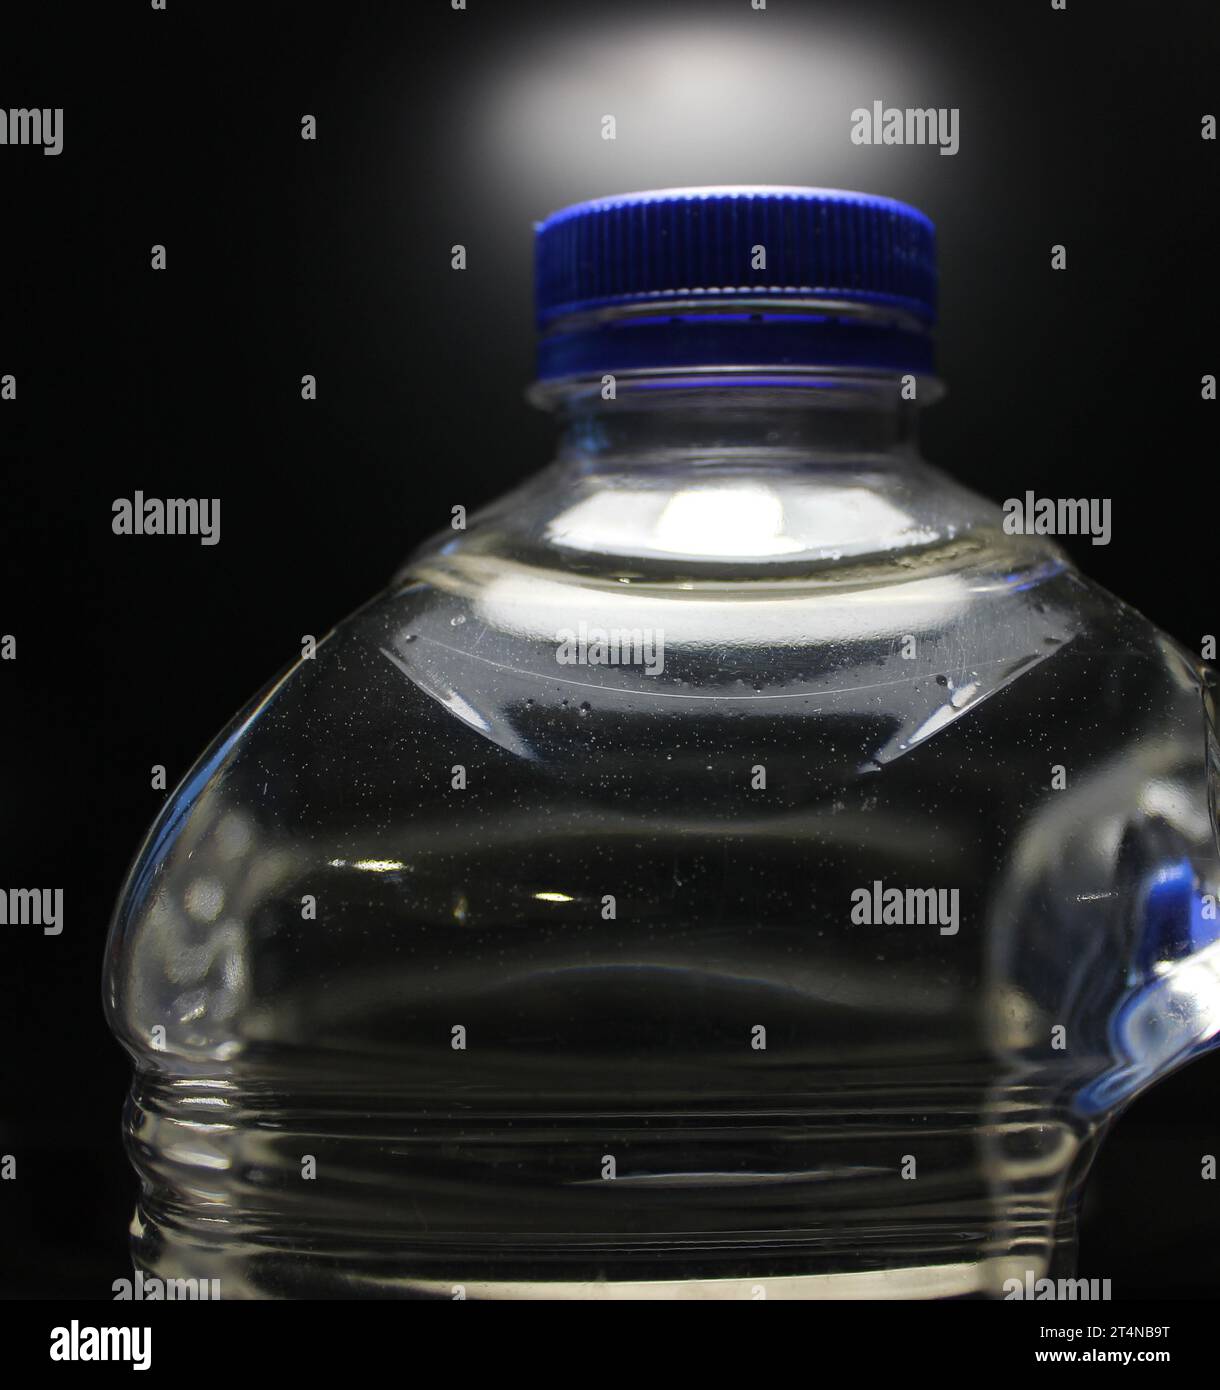 https://c8.alamy.com/comp/2T4NB9T/the-blue-cap-tightly-closes-the-neck-of-the-purified-water-bottle-2T4NB9T.jpg